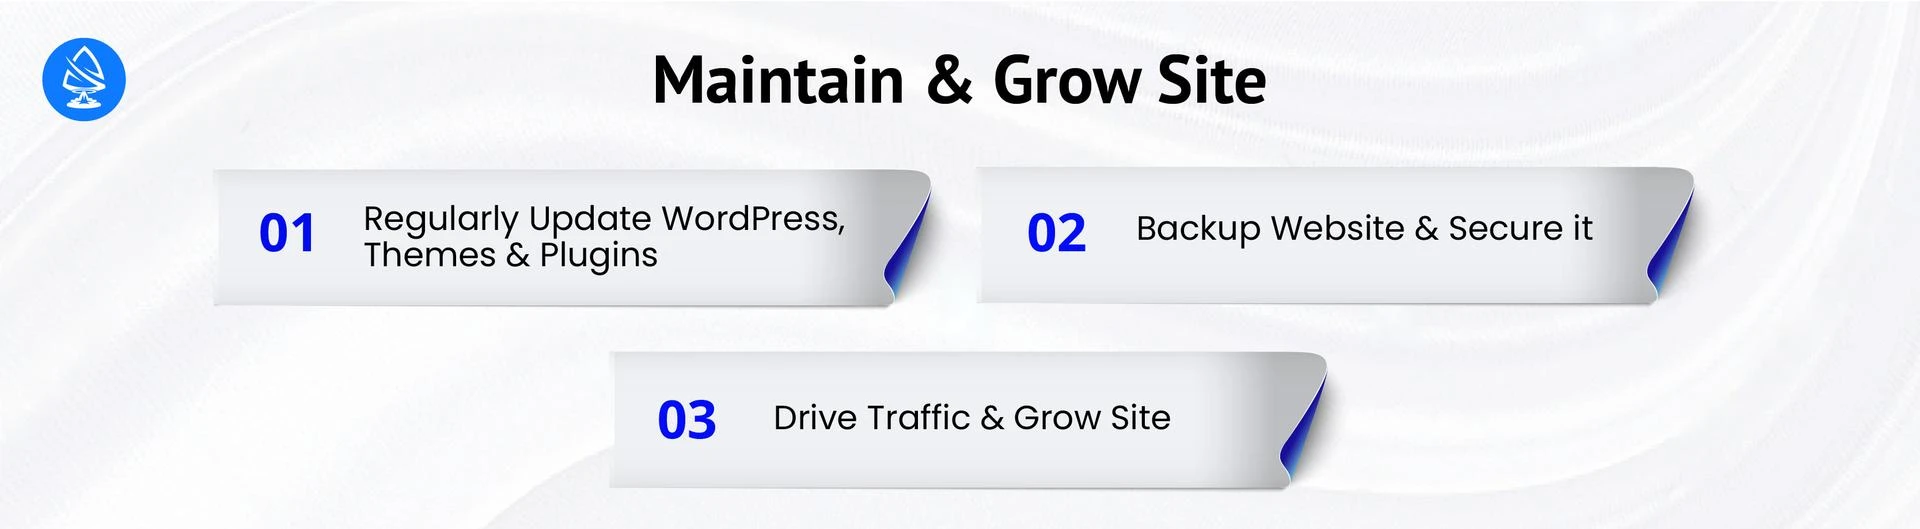 Maintaining and Growing Your Website 